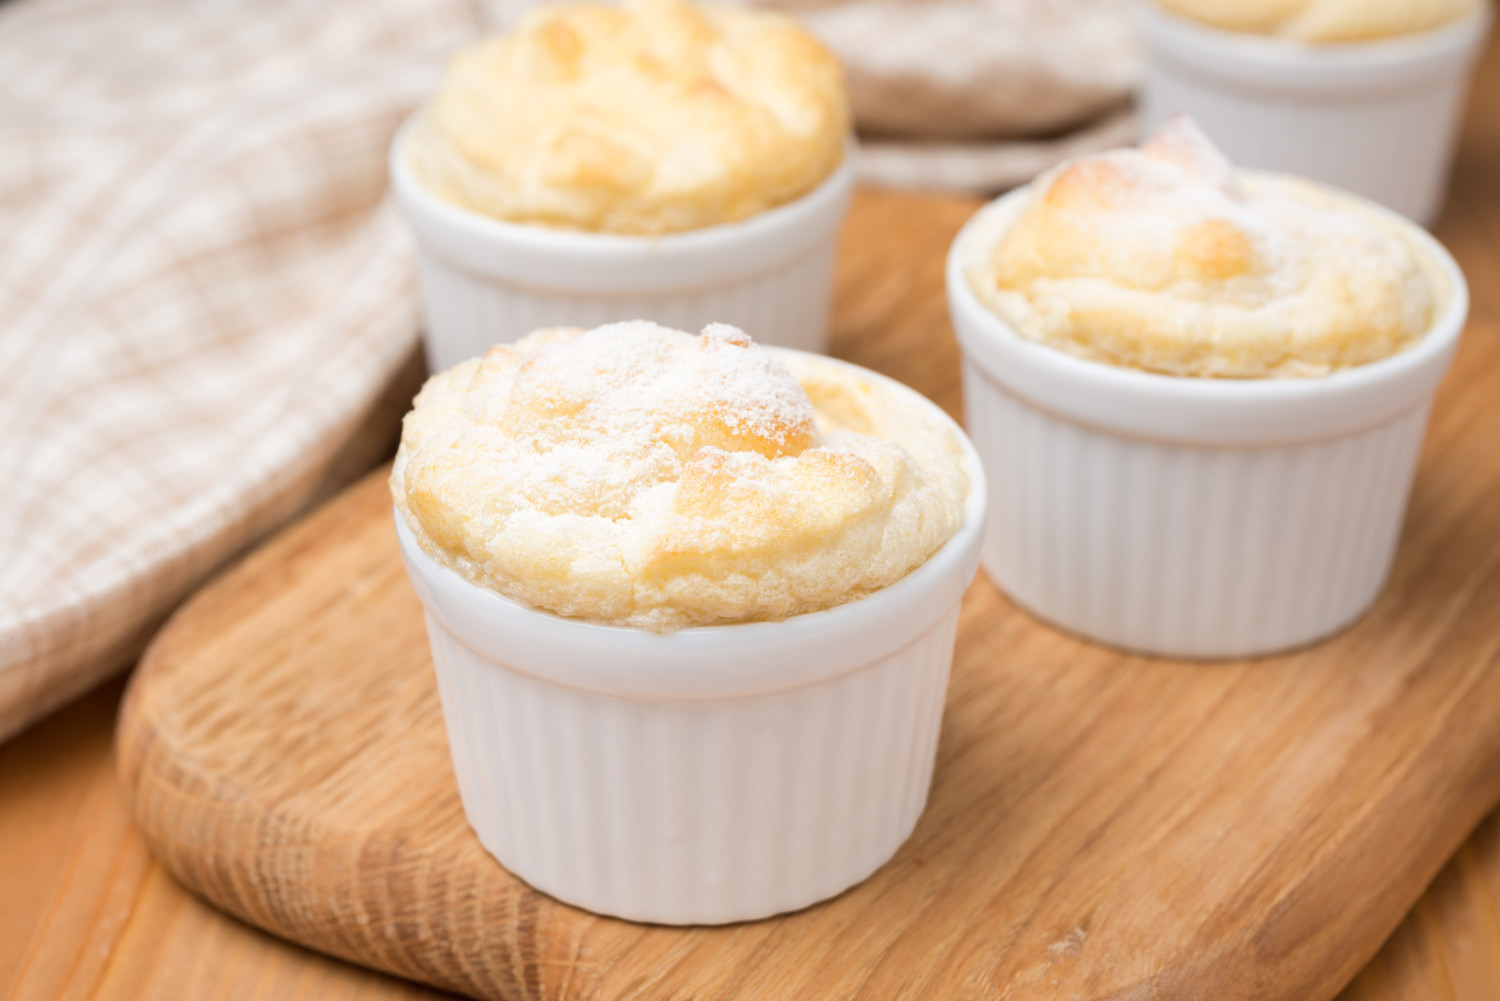 peach souffle in the portioned form on a wooden board, close-up